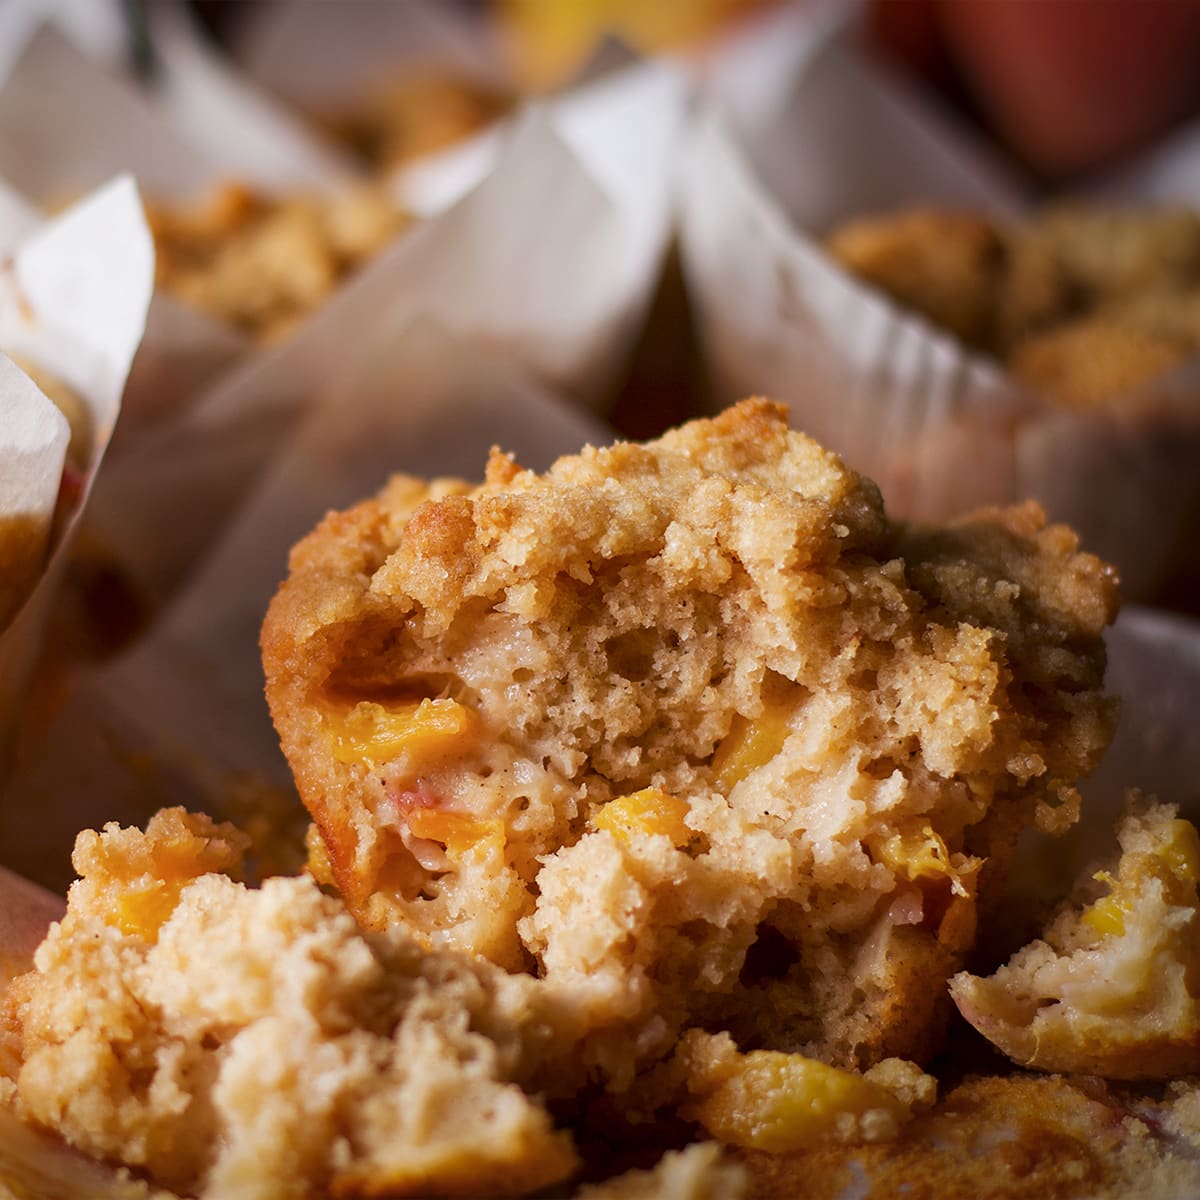 A peach cobbler muffin that's been broken in half so you can see the peach filled center of the muffin.